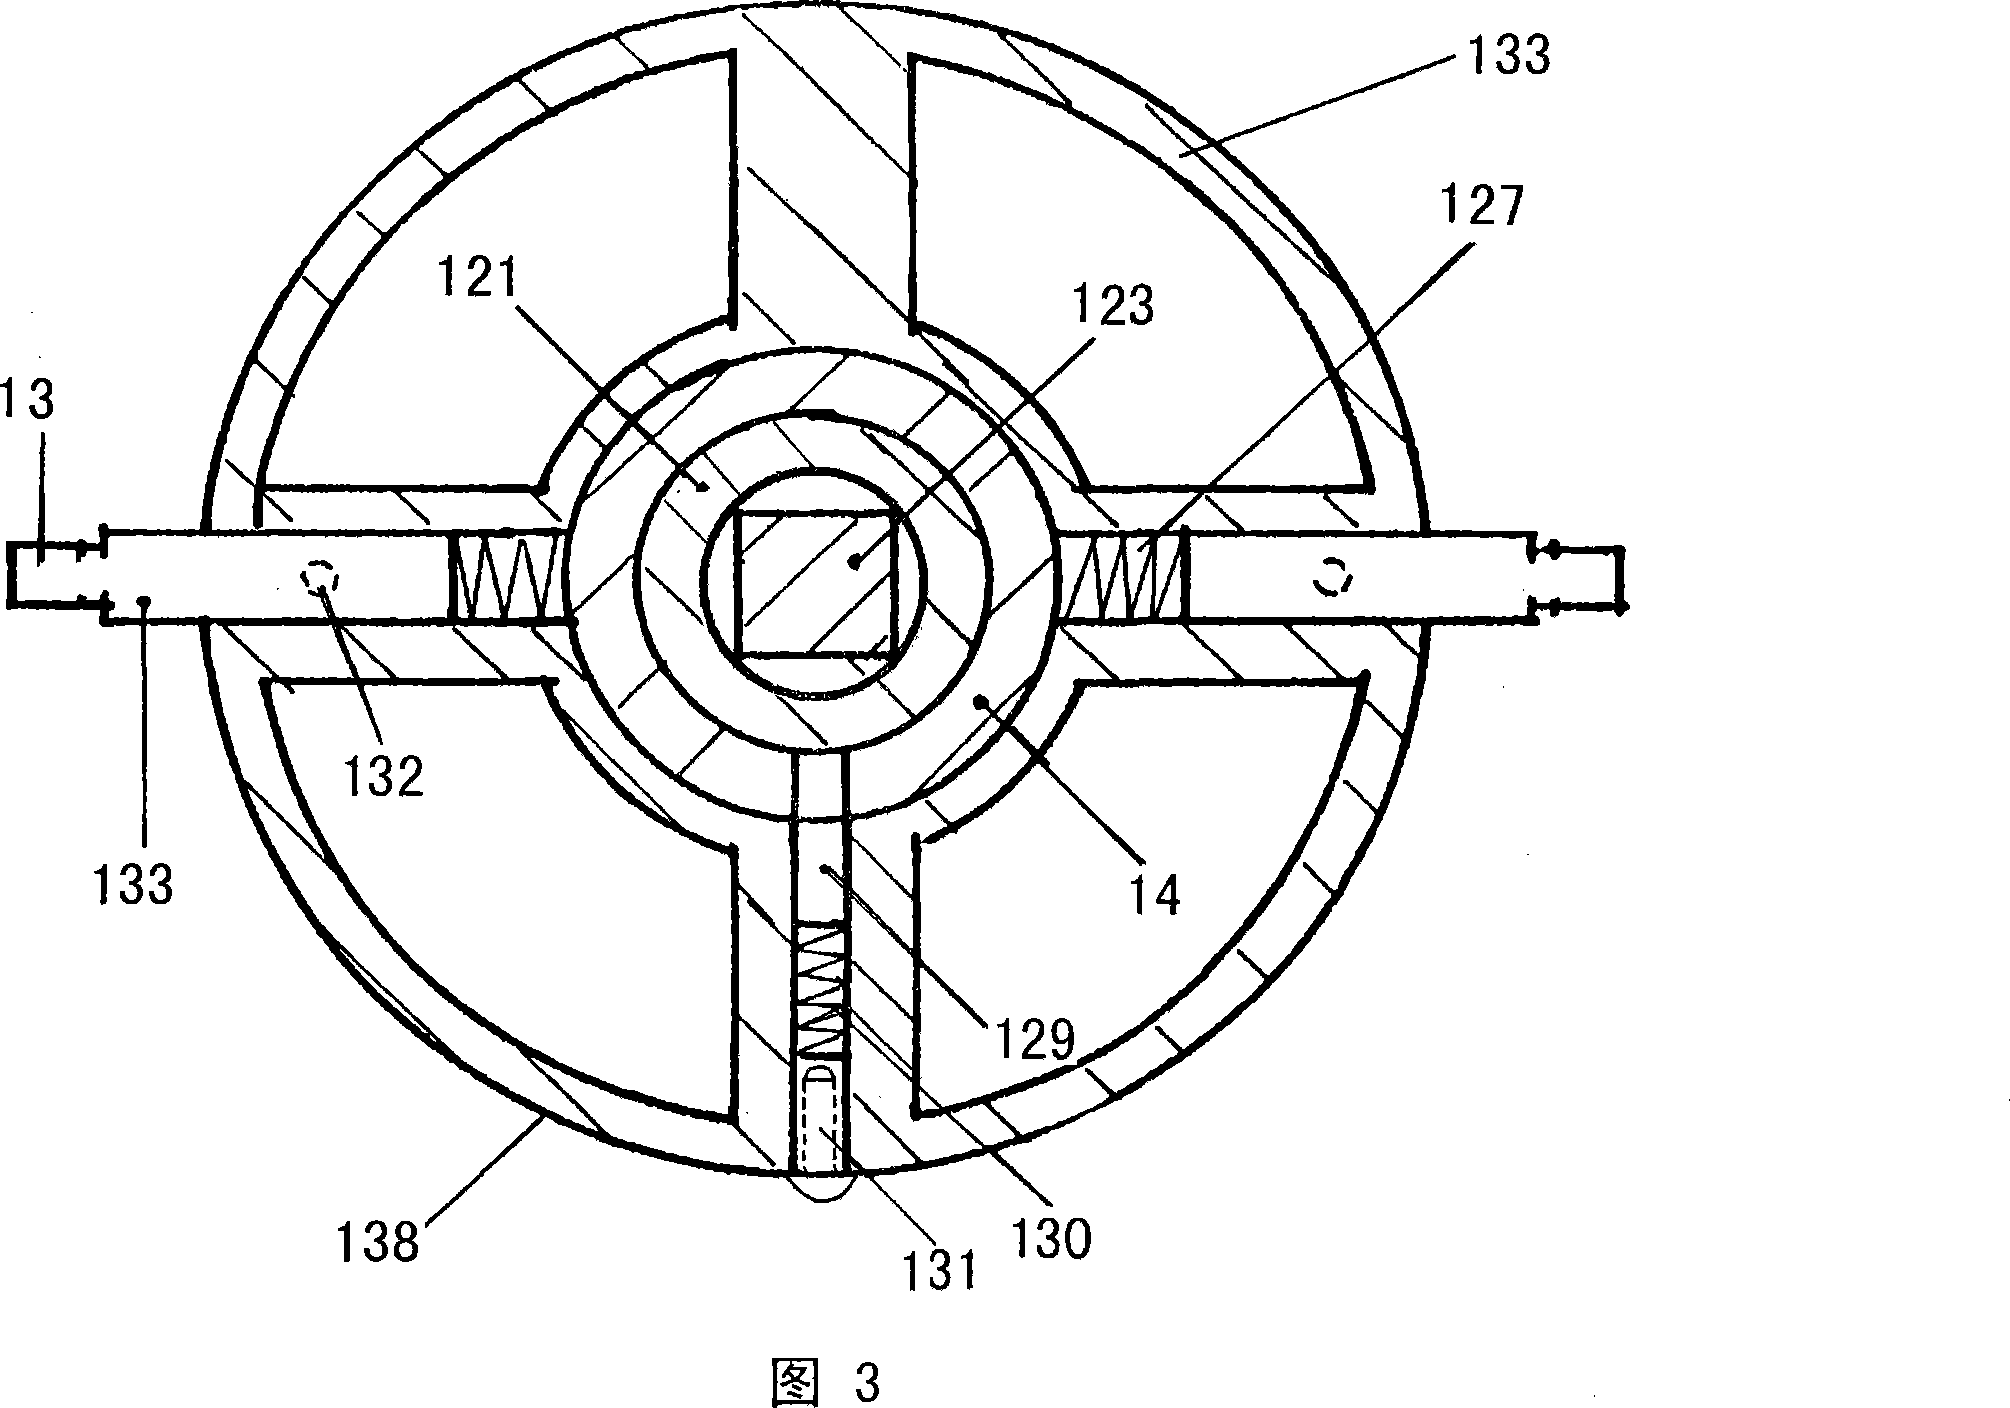 Bottom expanding and pile-forming method for pipe sinking prefabricated steel concrete pedestal pile